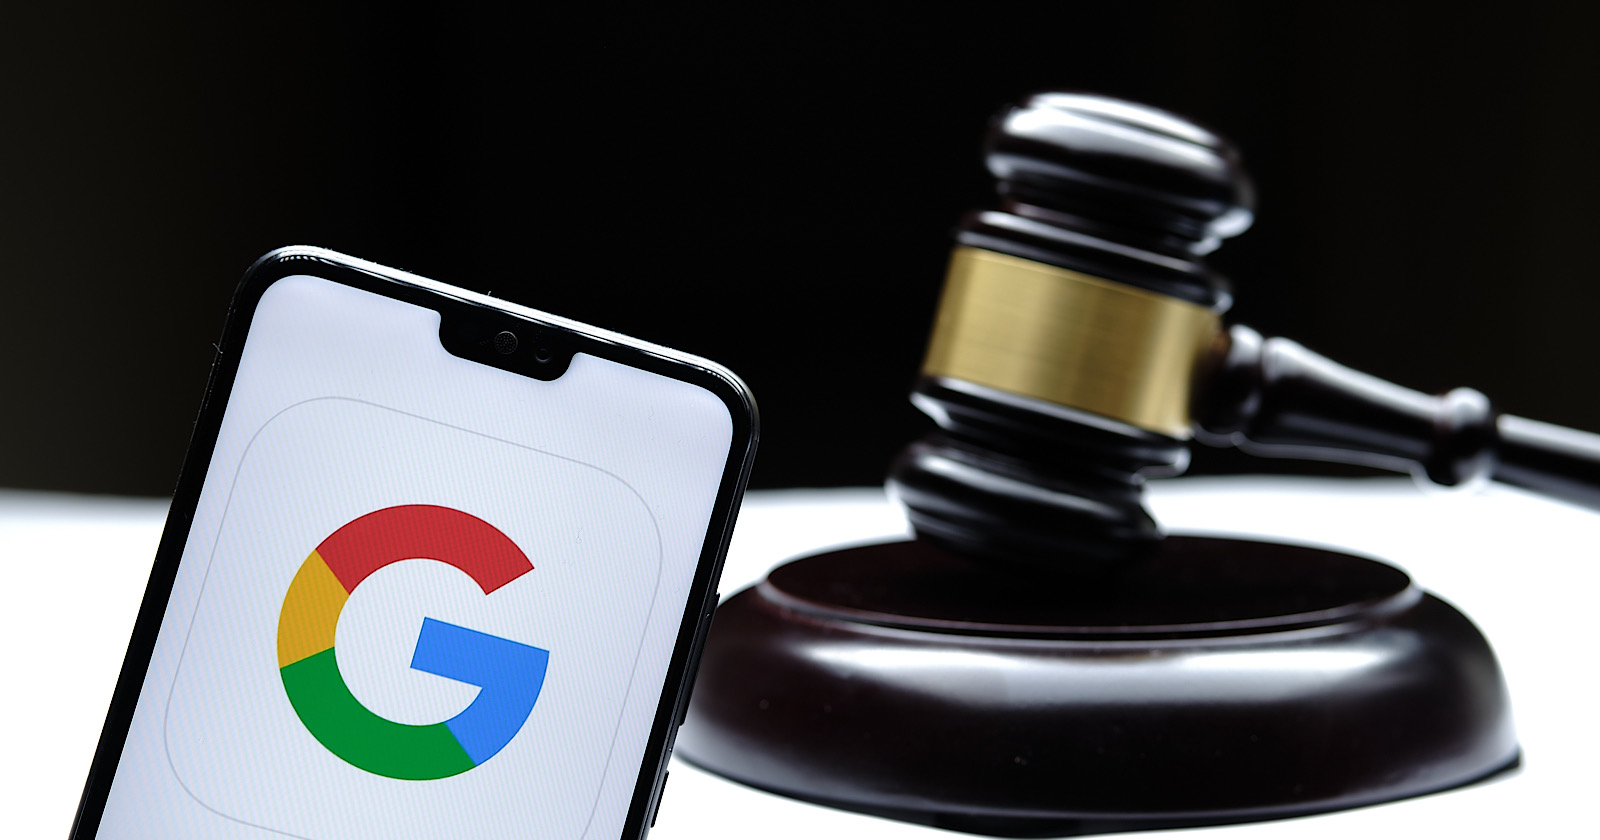 Online dating app company Match Group filed a lawsuit against Google on May 9, alleging the tech giant has created an illegal monopoly on Android by f